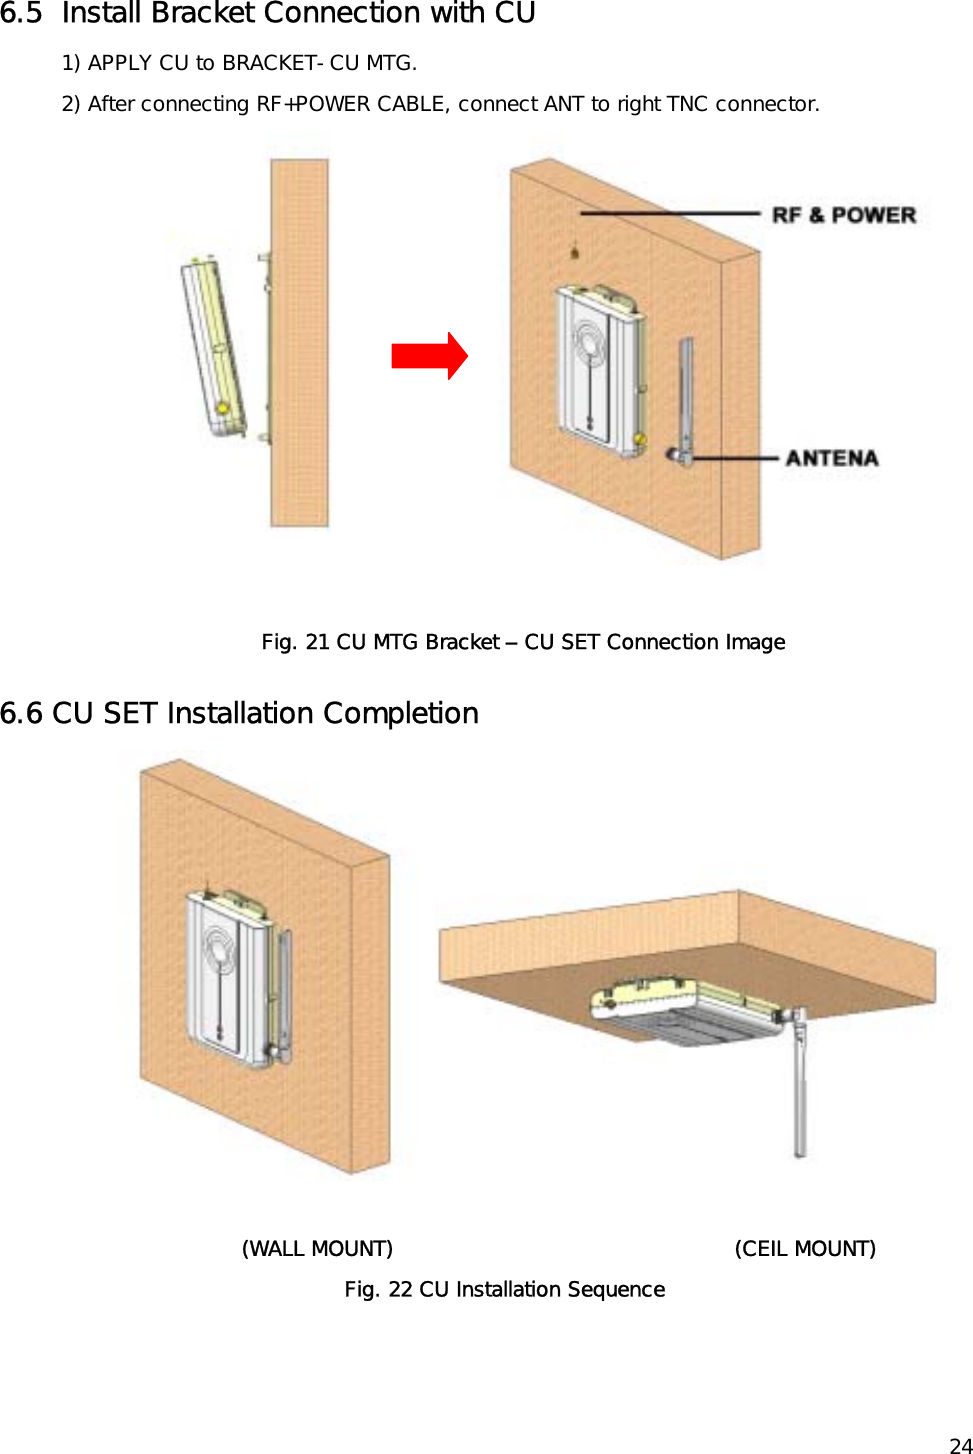    246.5  Install Bracket Connection with CU 1) APPLY CU to BRACKET-CU MTG. 2) After connecting RF+POWER CABLE, connect ANT to right TNC connector.  Fig. 21 CU MTG Bracket – CU SET Connection Image 6.6 CU SET Installation Completion       (WALL MOUNT)                                                 (CEIL MOUNT)         Fig. 22 CU Installation Sequence 